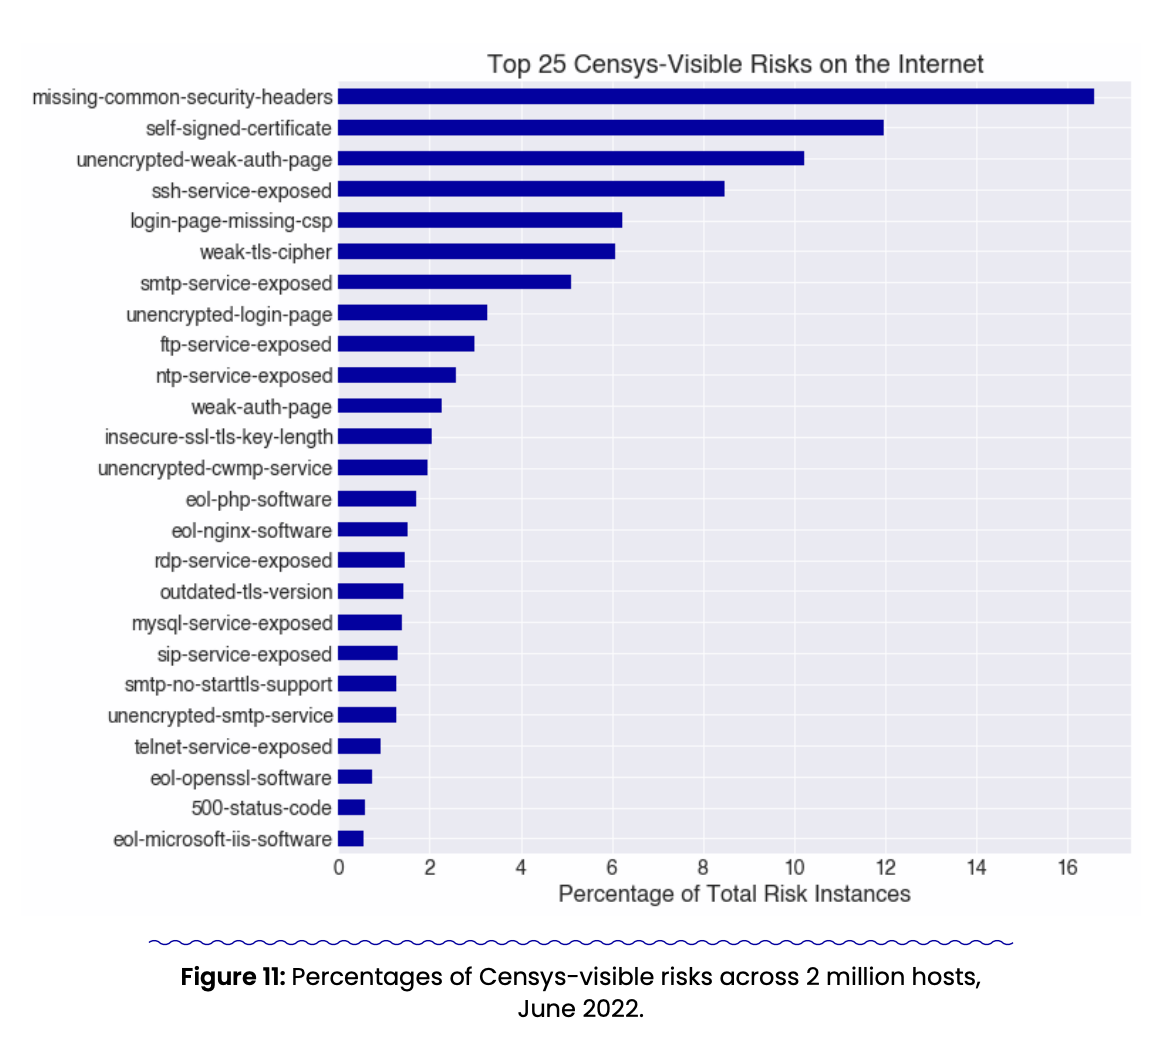 Top 25 Censys-Visible Risks on the Internet Bar Chart